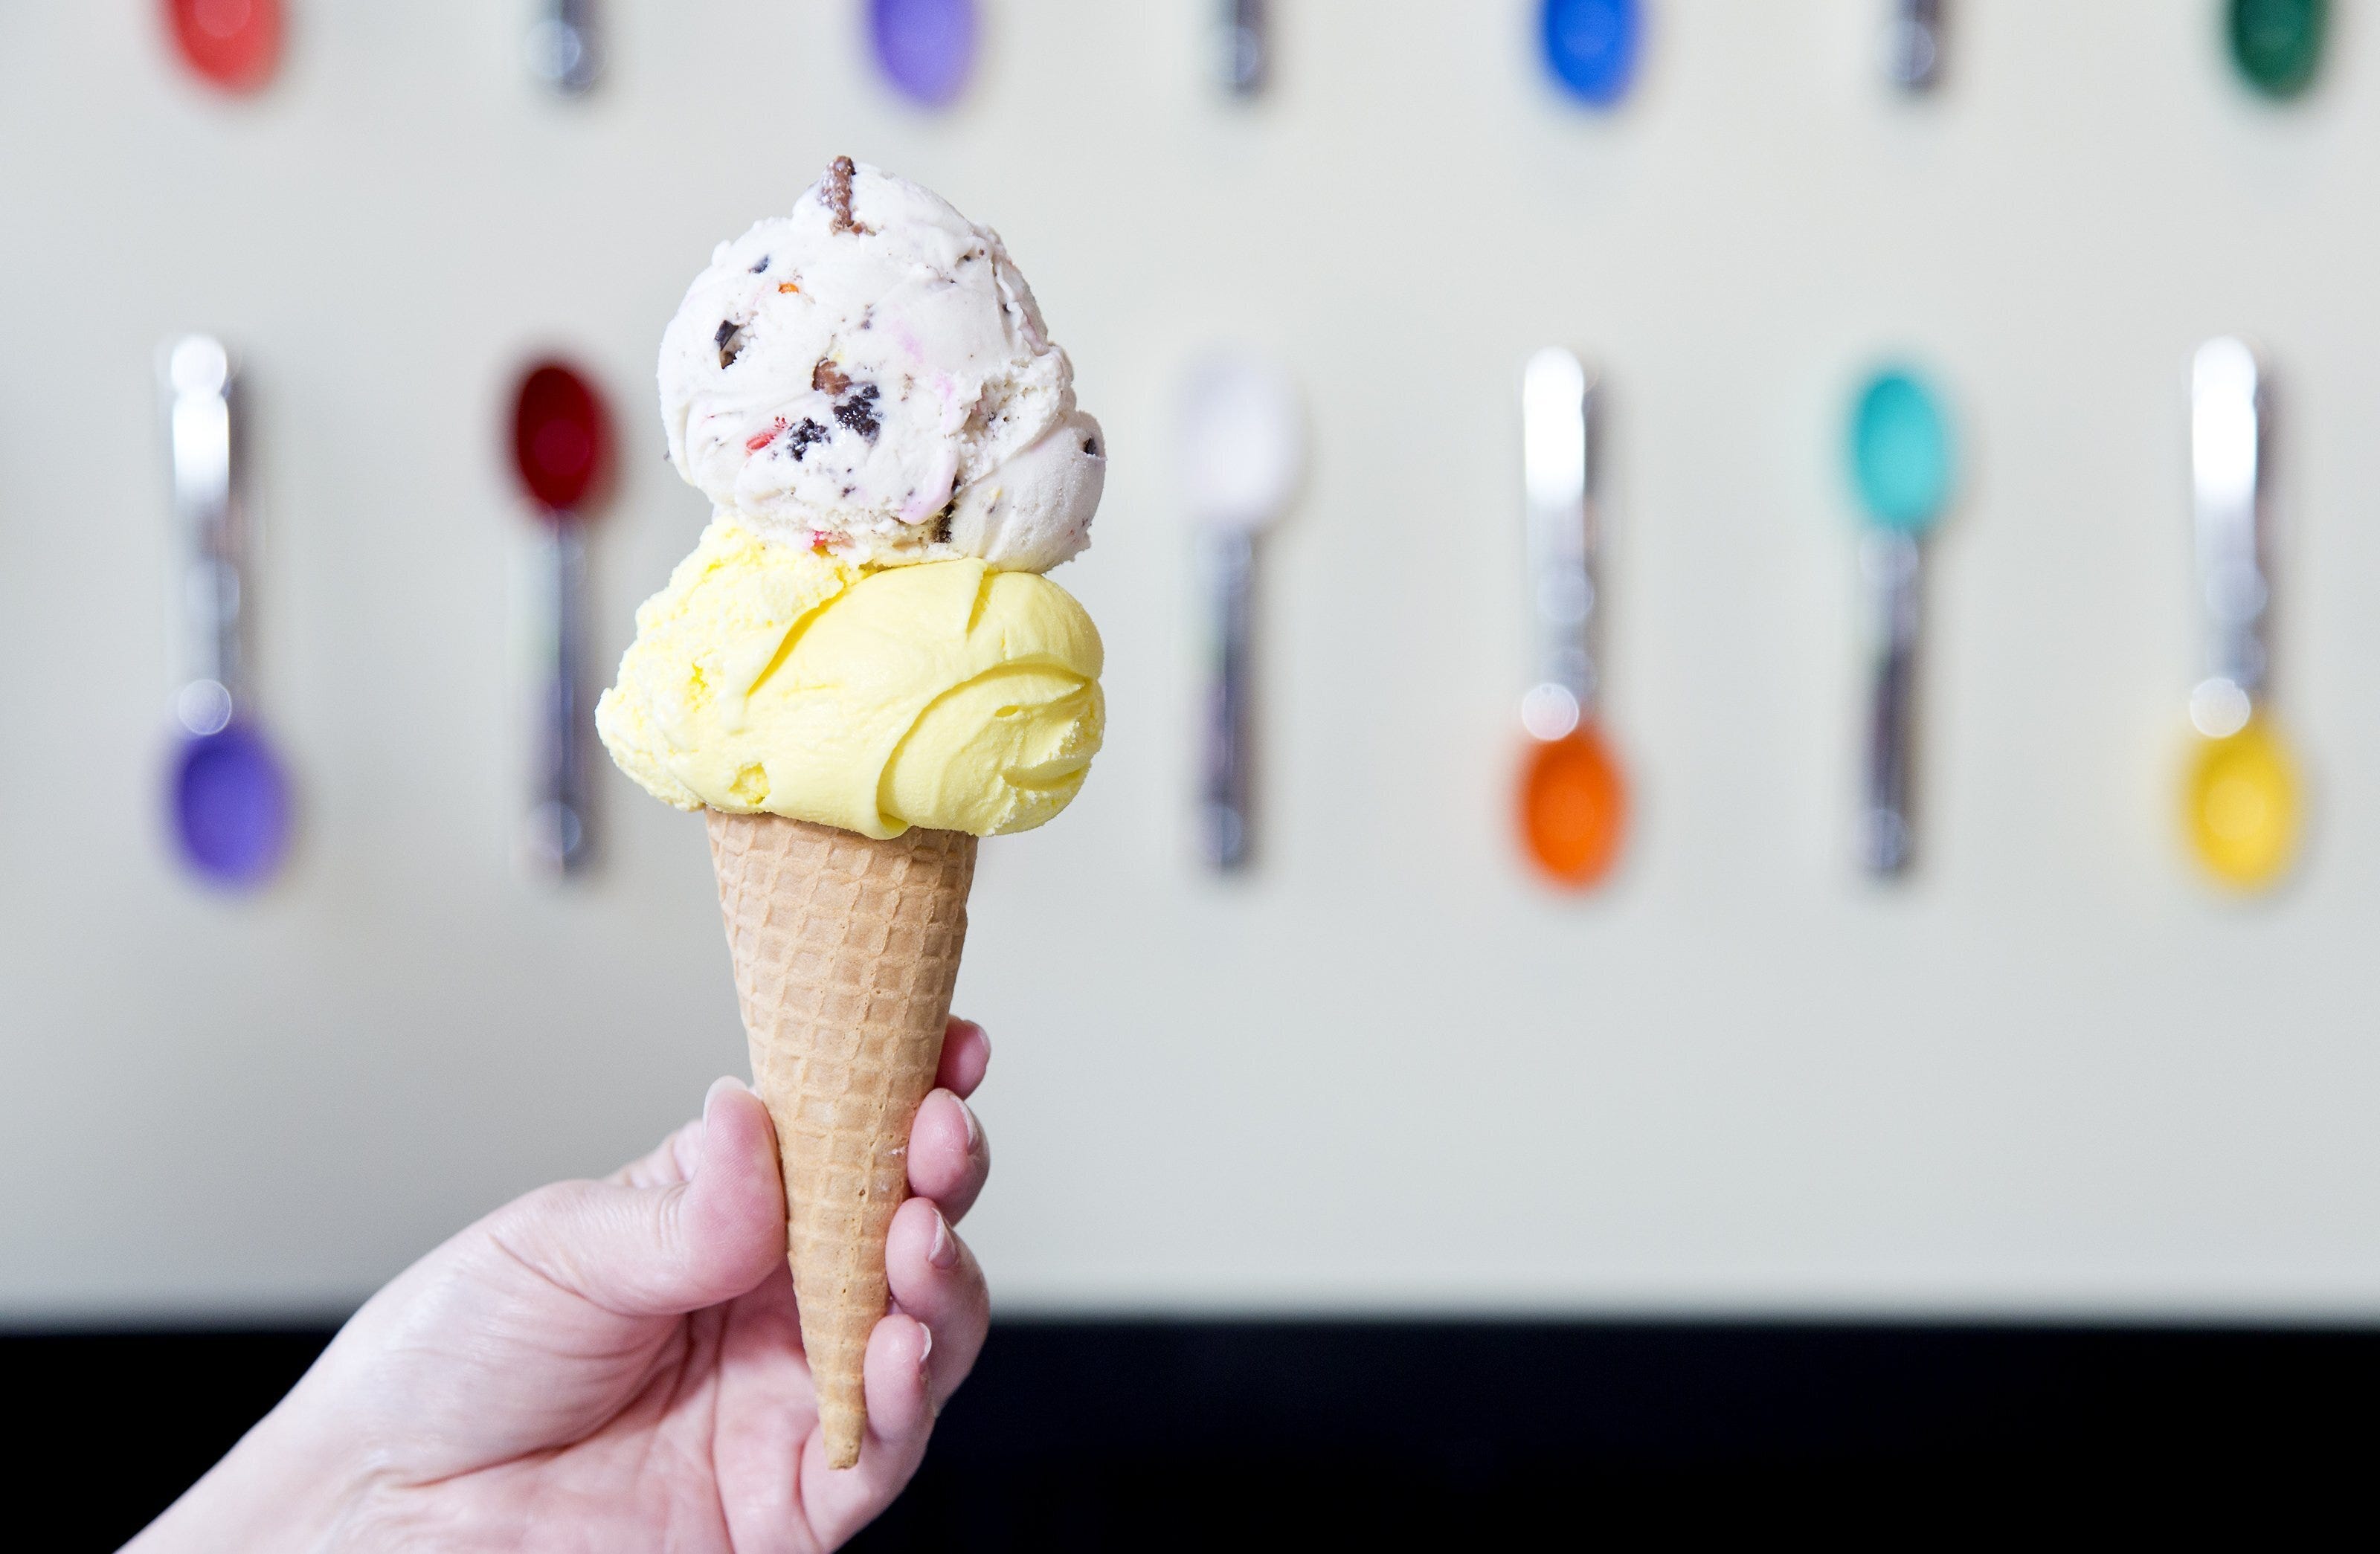 Johnson's Real Ice Cream offers a variety of tasty treats, including seasonal favorites.